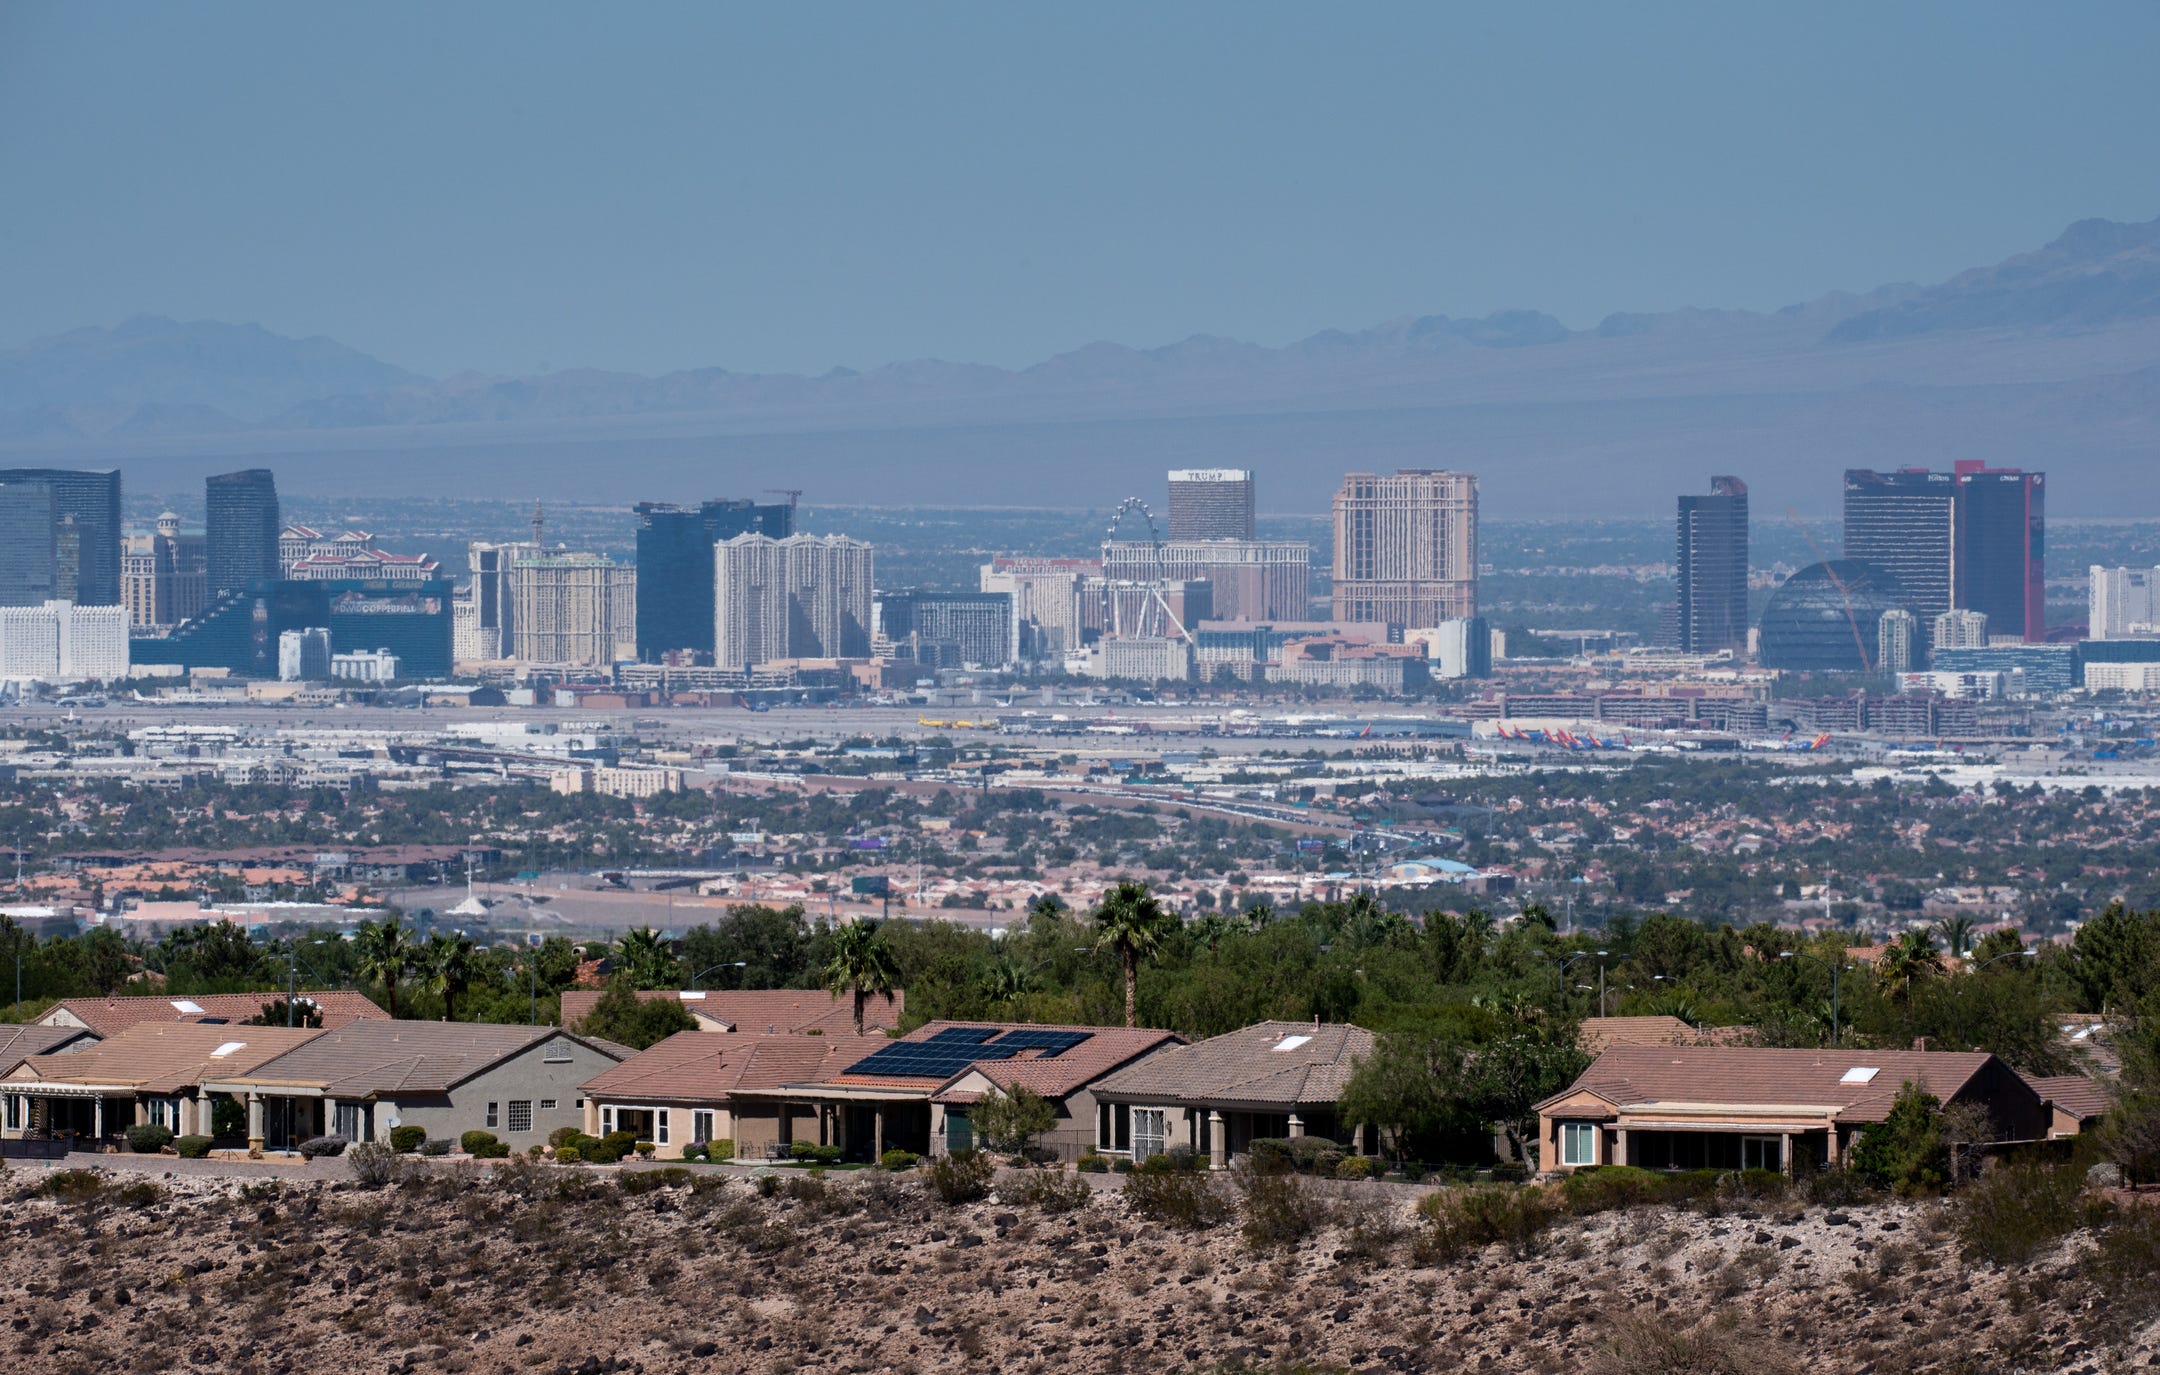 Water wasters in Las Vegas receiving more fines than ever before